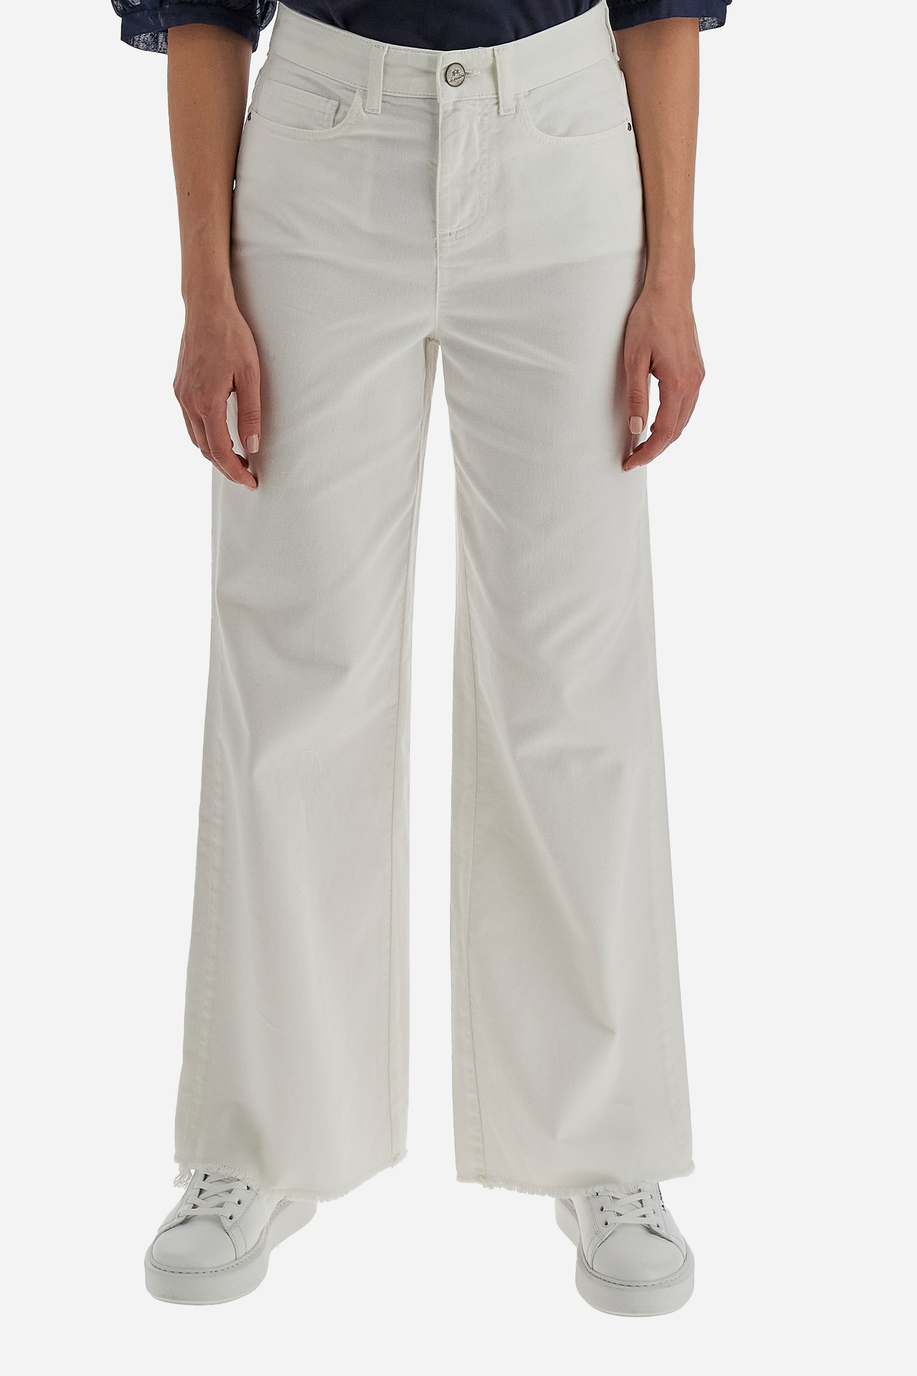 Women's 5-pocket jeans trousers in solid color Spring Weekend - Villard - Preview | La Martina - Official Online Shop